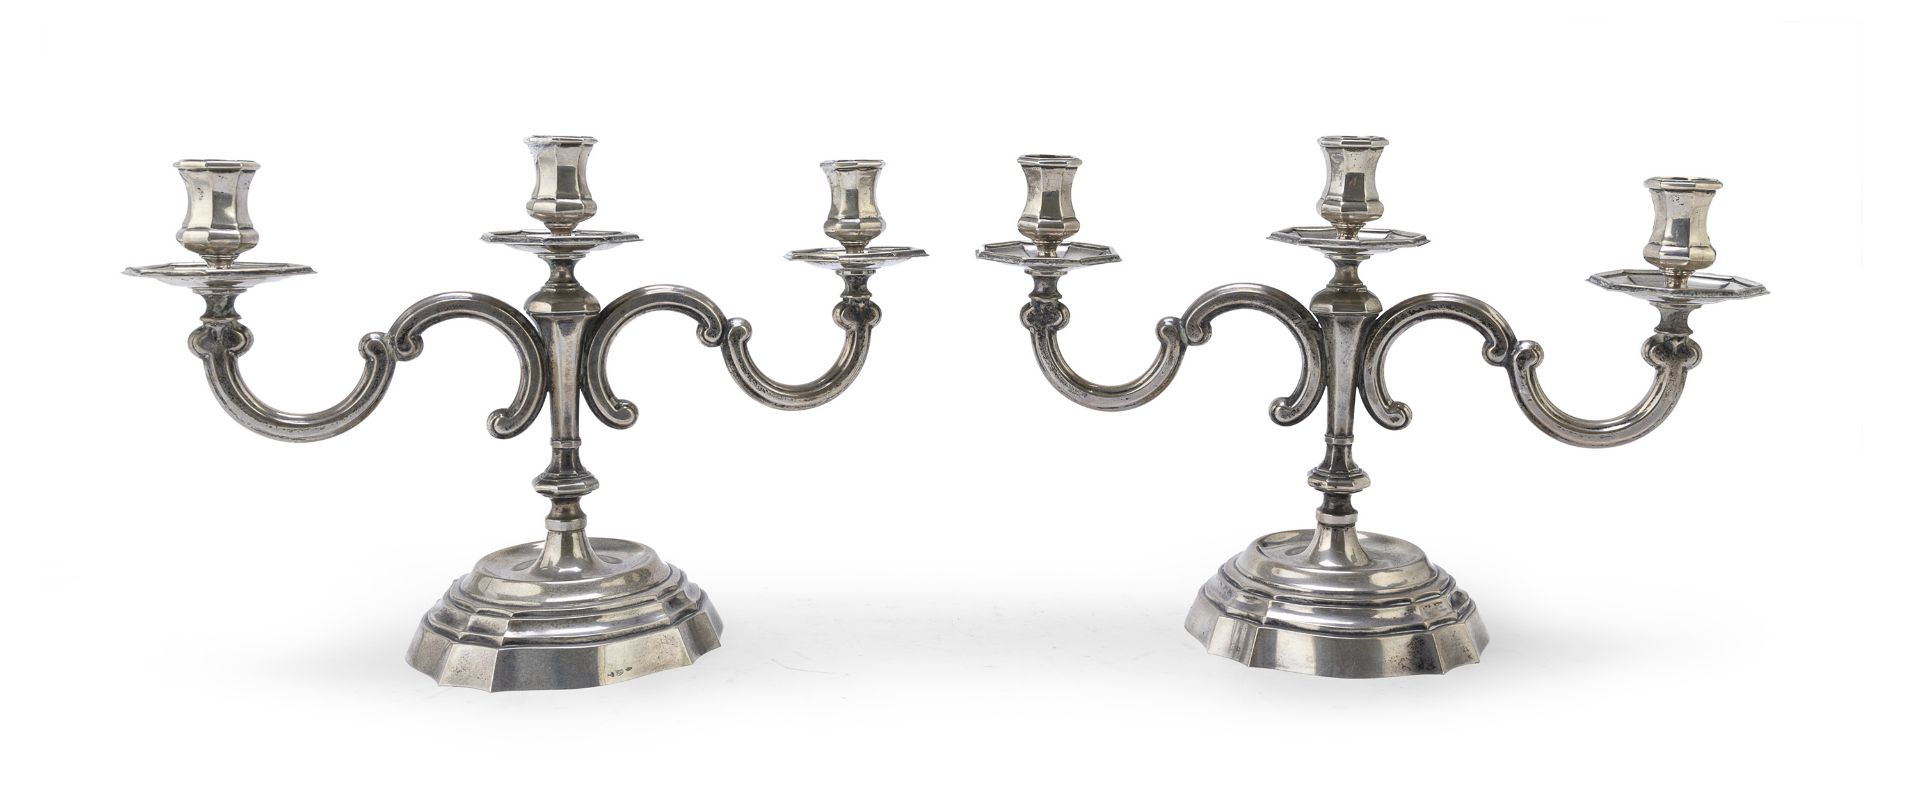 PAIR OF SMALL SILVER CANDLESTICKS FLORENCE 1970 ca.